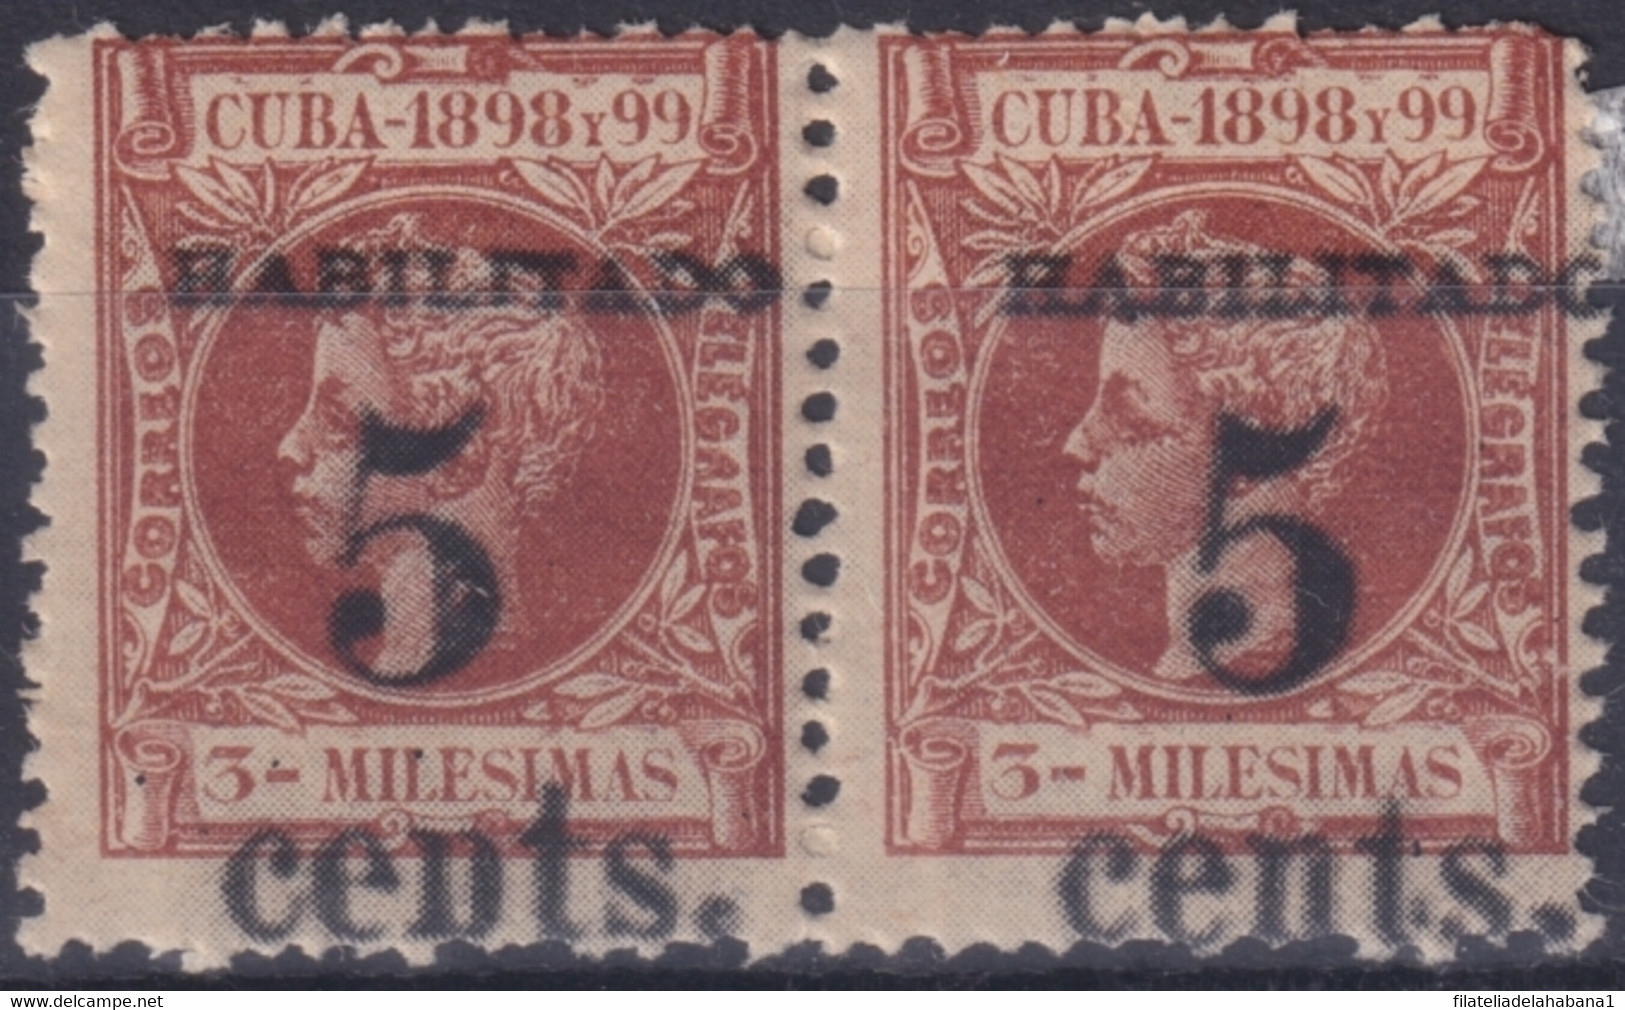 1899-481 CUBA 1899 5c S. 3c US OCCUPATION 2th ISSUE PAIR PHILATELIC FORGERY. - Nuovi